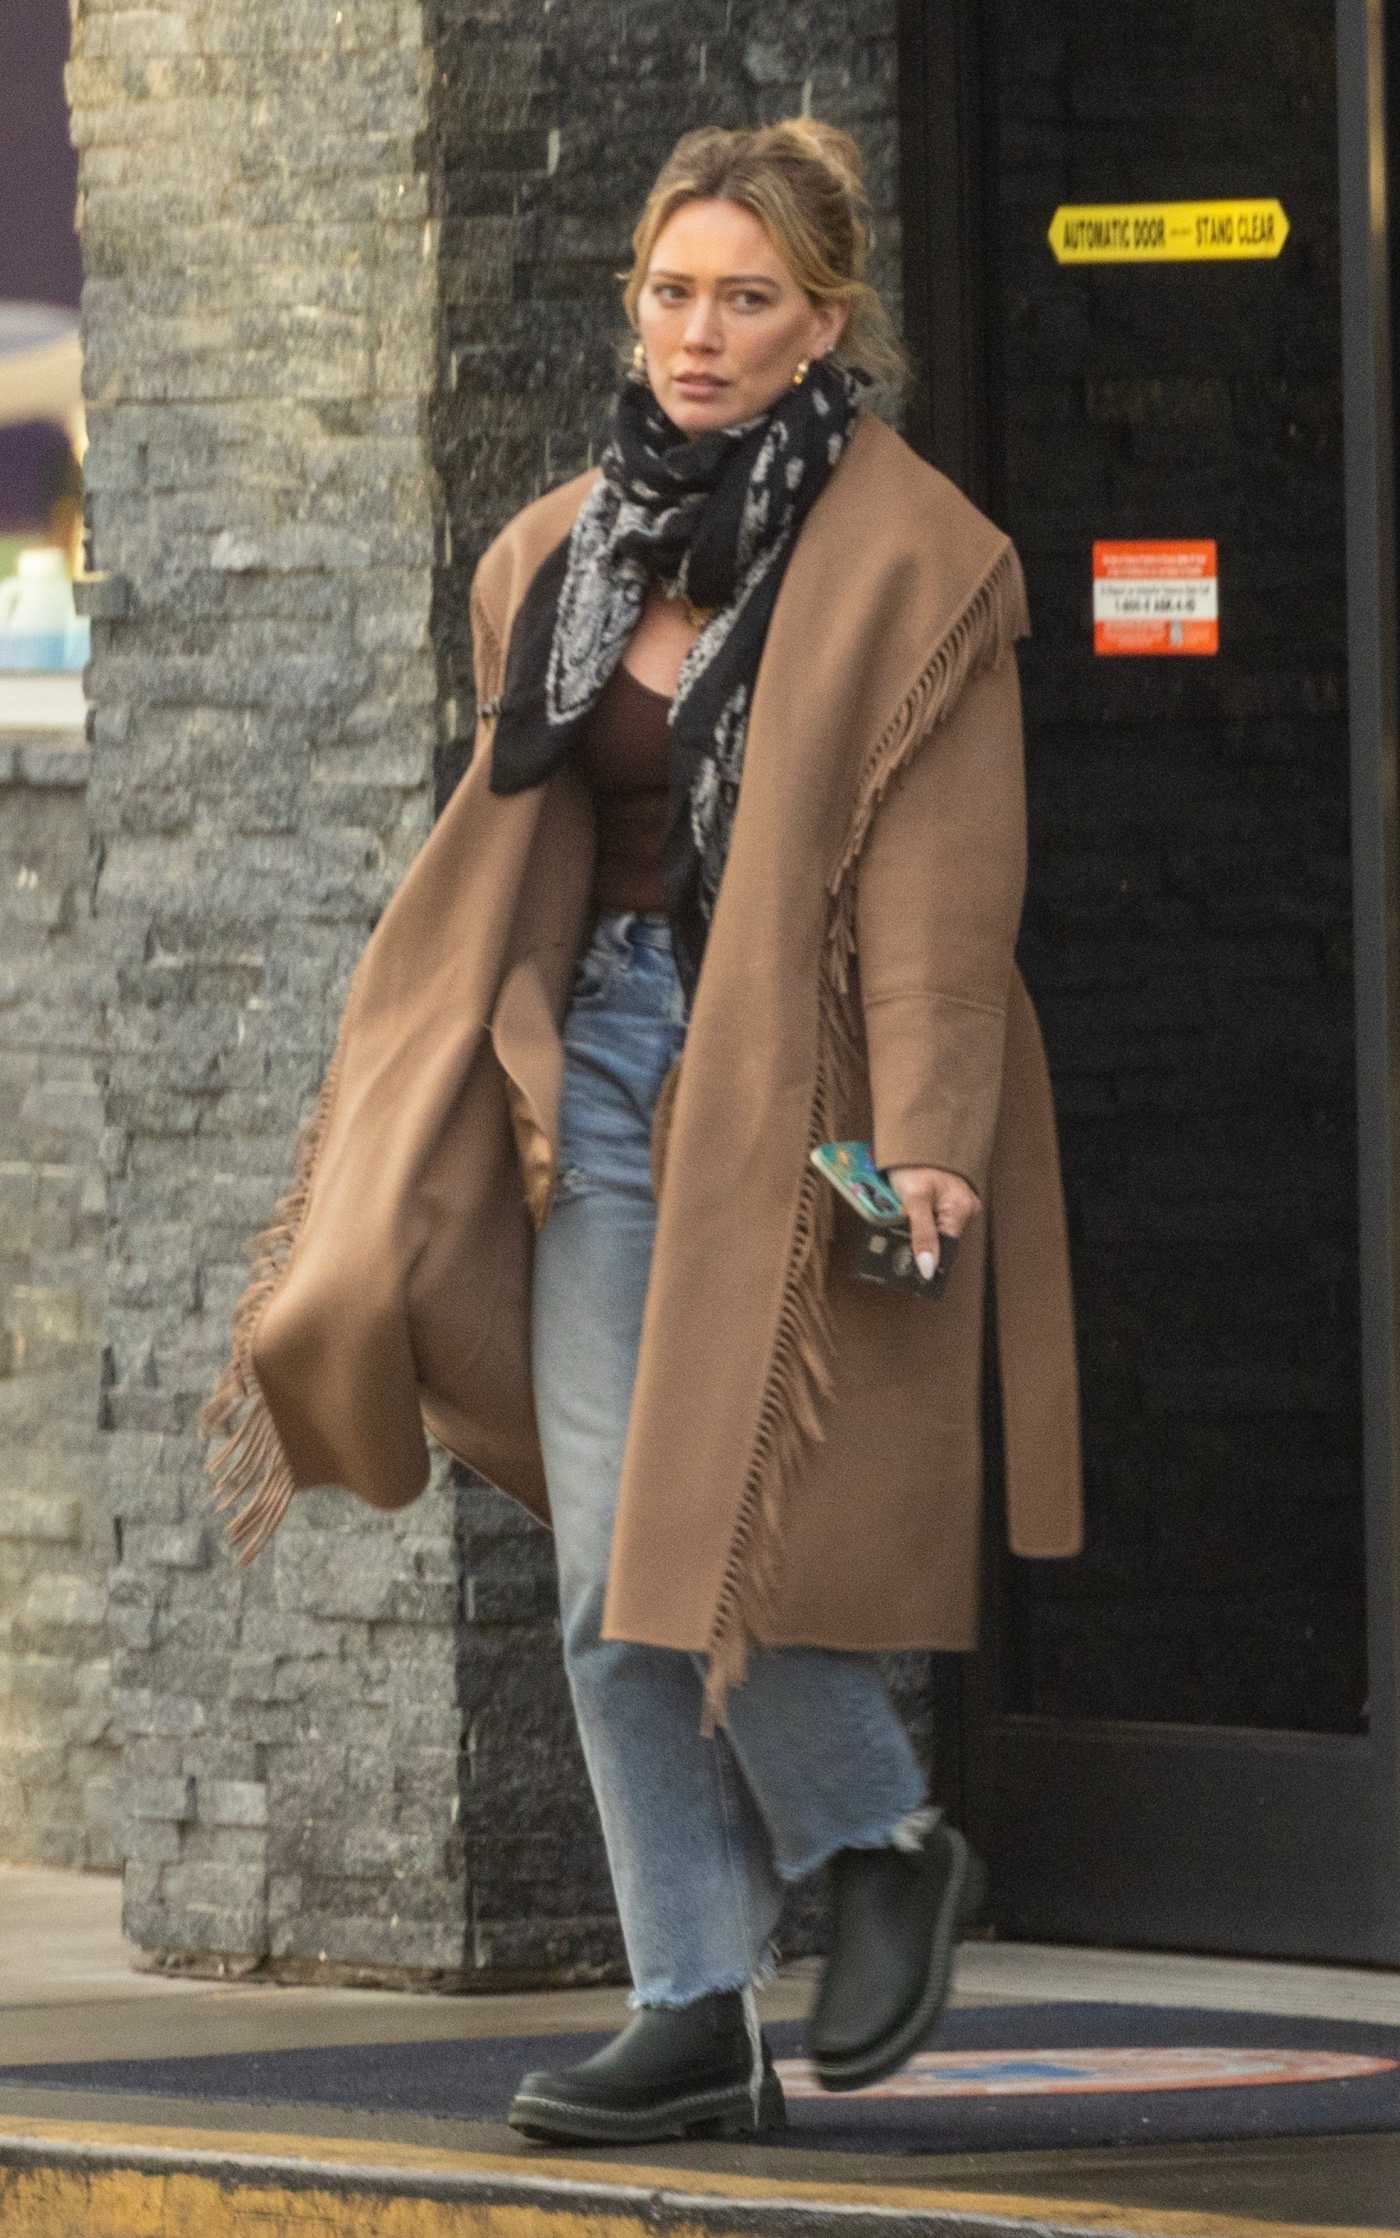 Hilary Duff in a Tan Coat Was Seen at a Gas Station in Studio City 11/07/2022